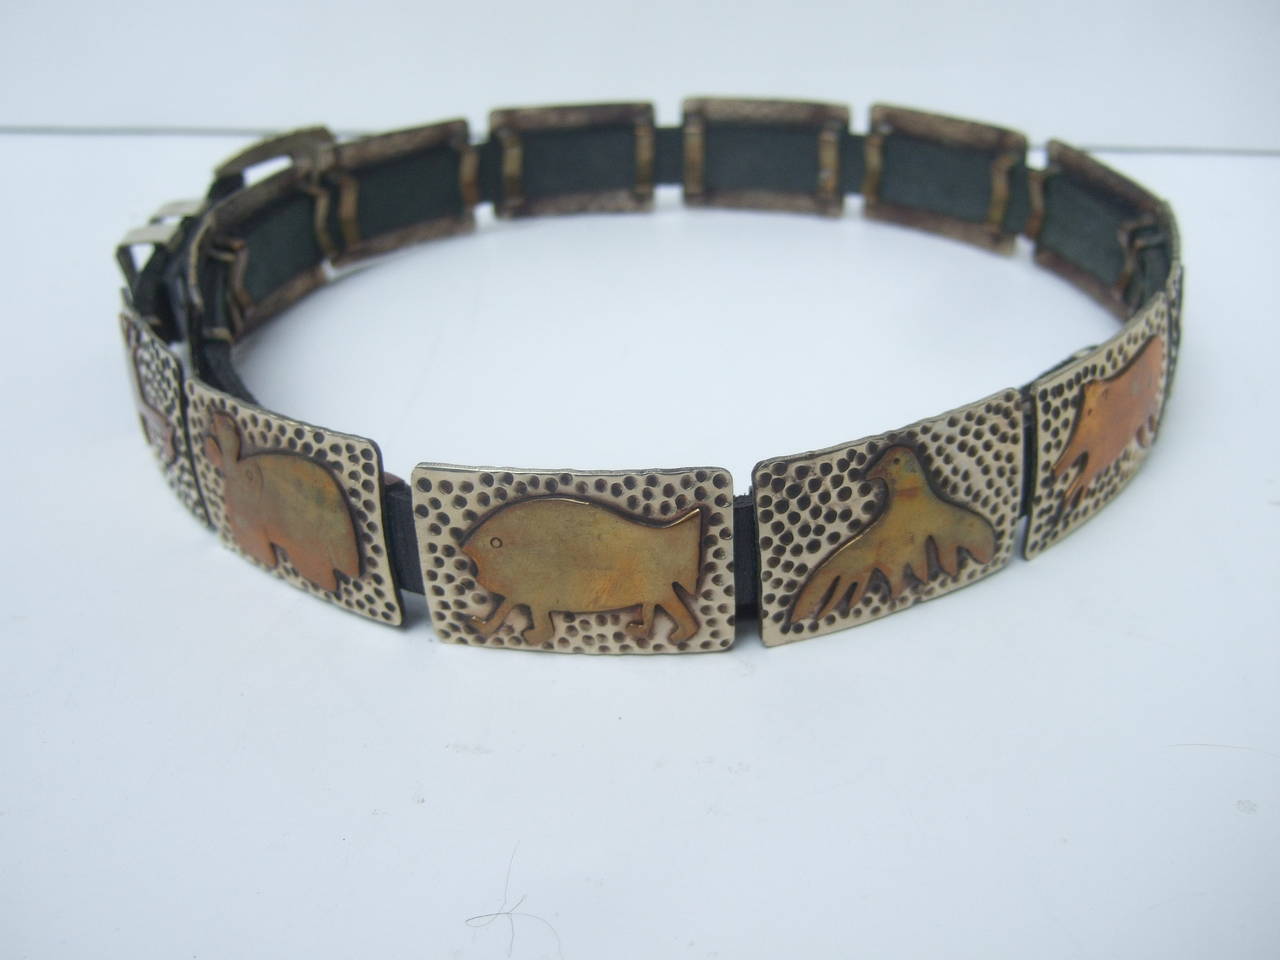 Hand forged mixed metal artisan animal belt designed by Lunacy c 1970s
The unique artisan black belt is designed with silver & brass metal tiles
Each tile depicts a different type of animal figure. The animals & reptiles
range from